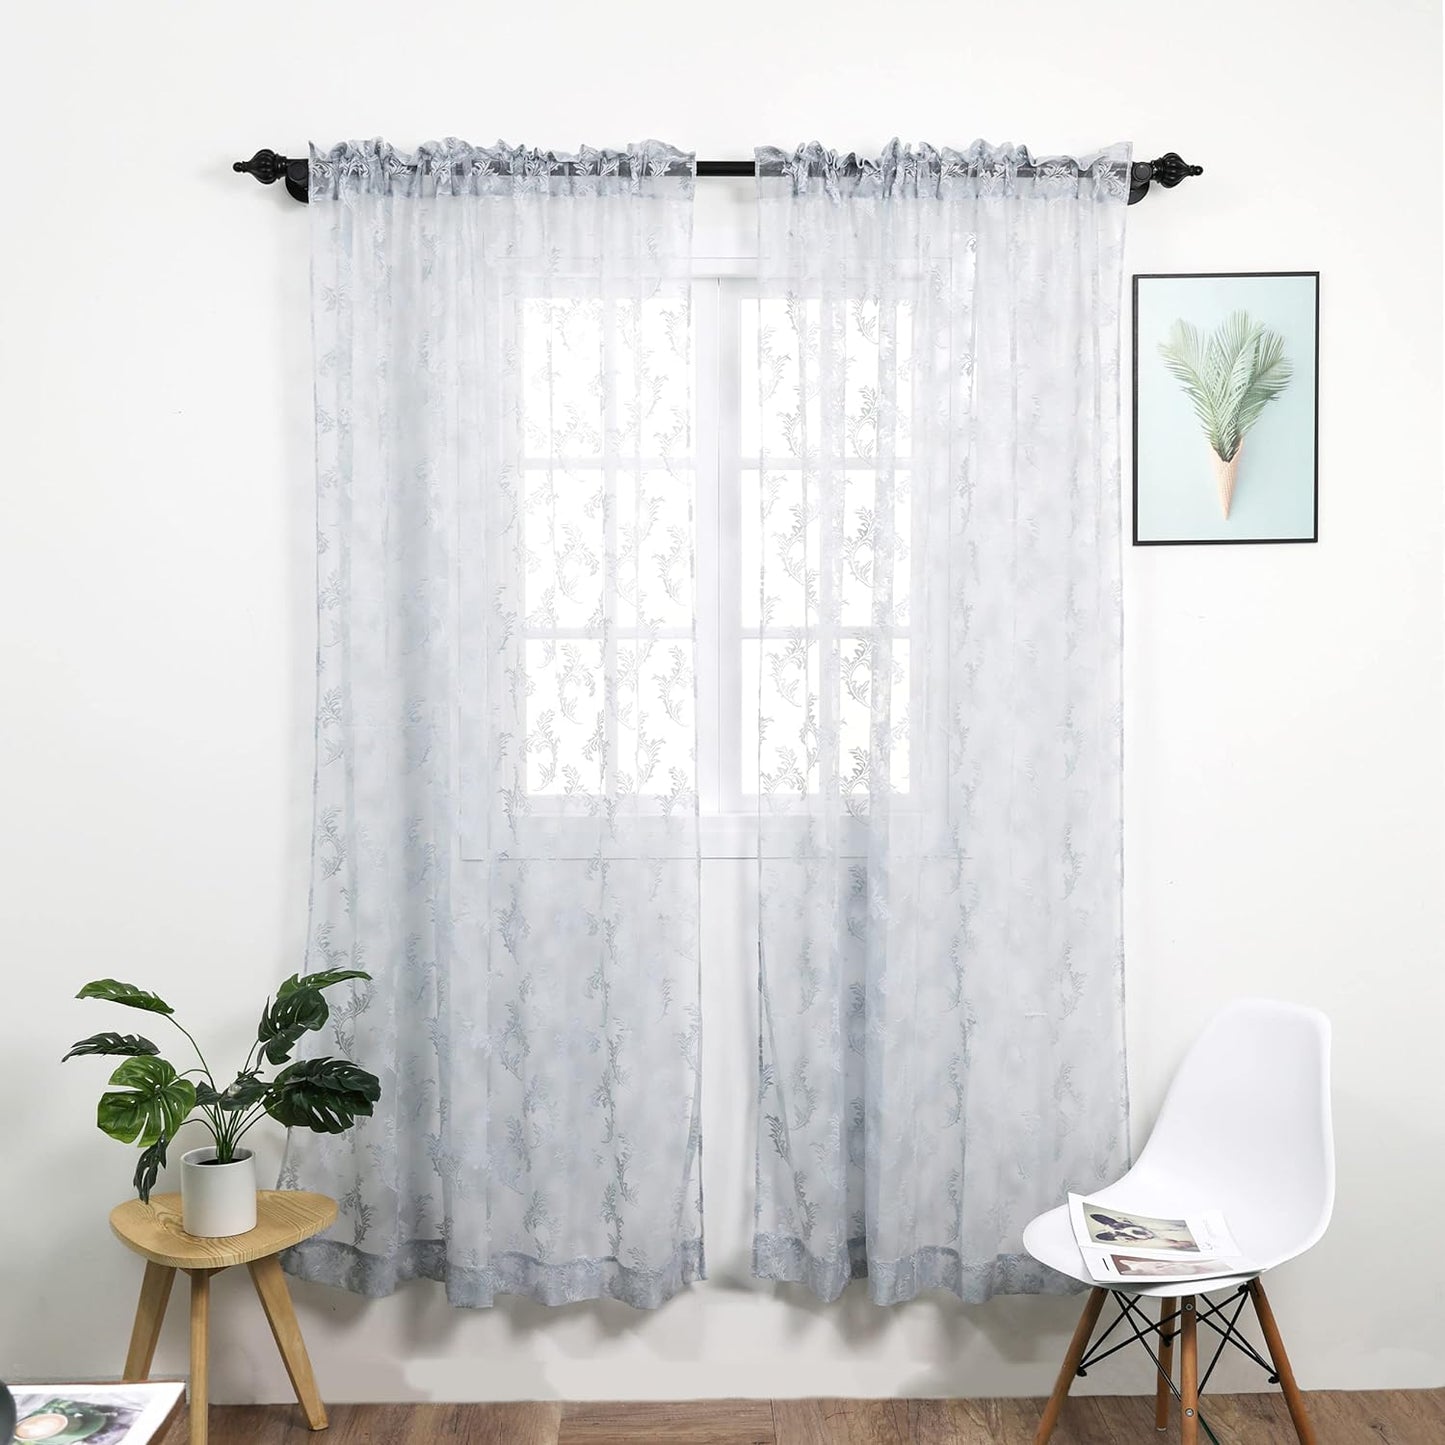 Rloncomix White Sheer Curtains Decorative Leaves Knitted Textured Rod Pocket Semi Light Filtering Airy Window Drapes for Bedroom Kitchen, 52 X 63 Inch, 2 Panels  BAIHT HOME Grey 52"W X 72"L | 2 Pcs 